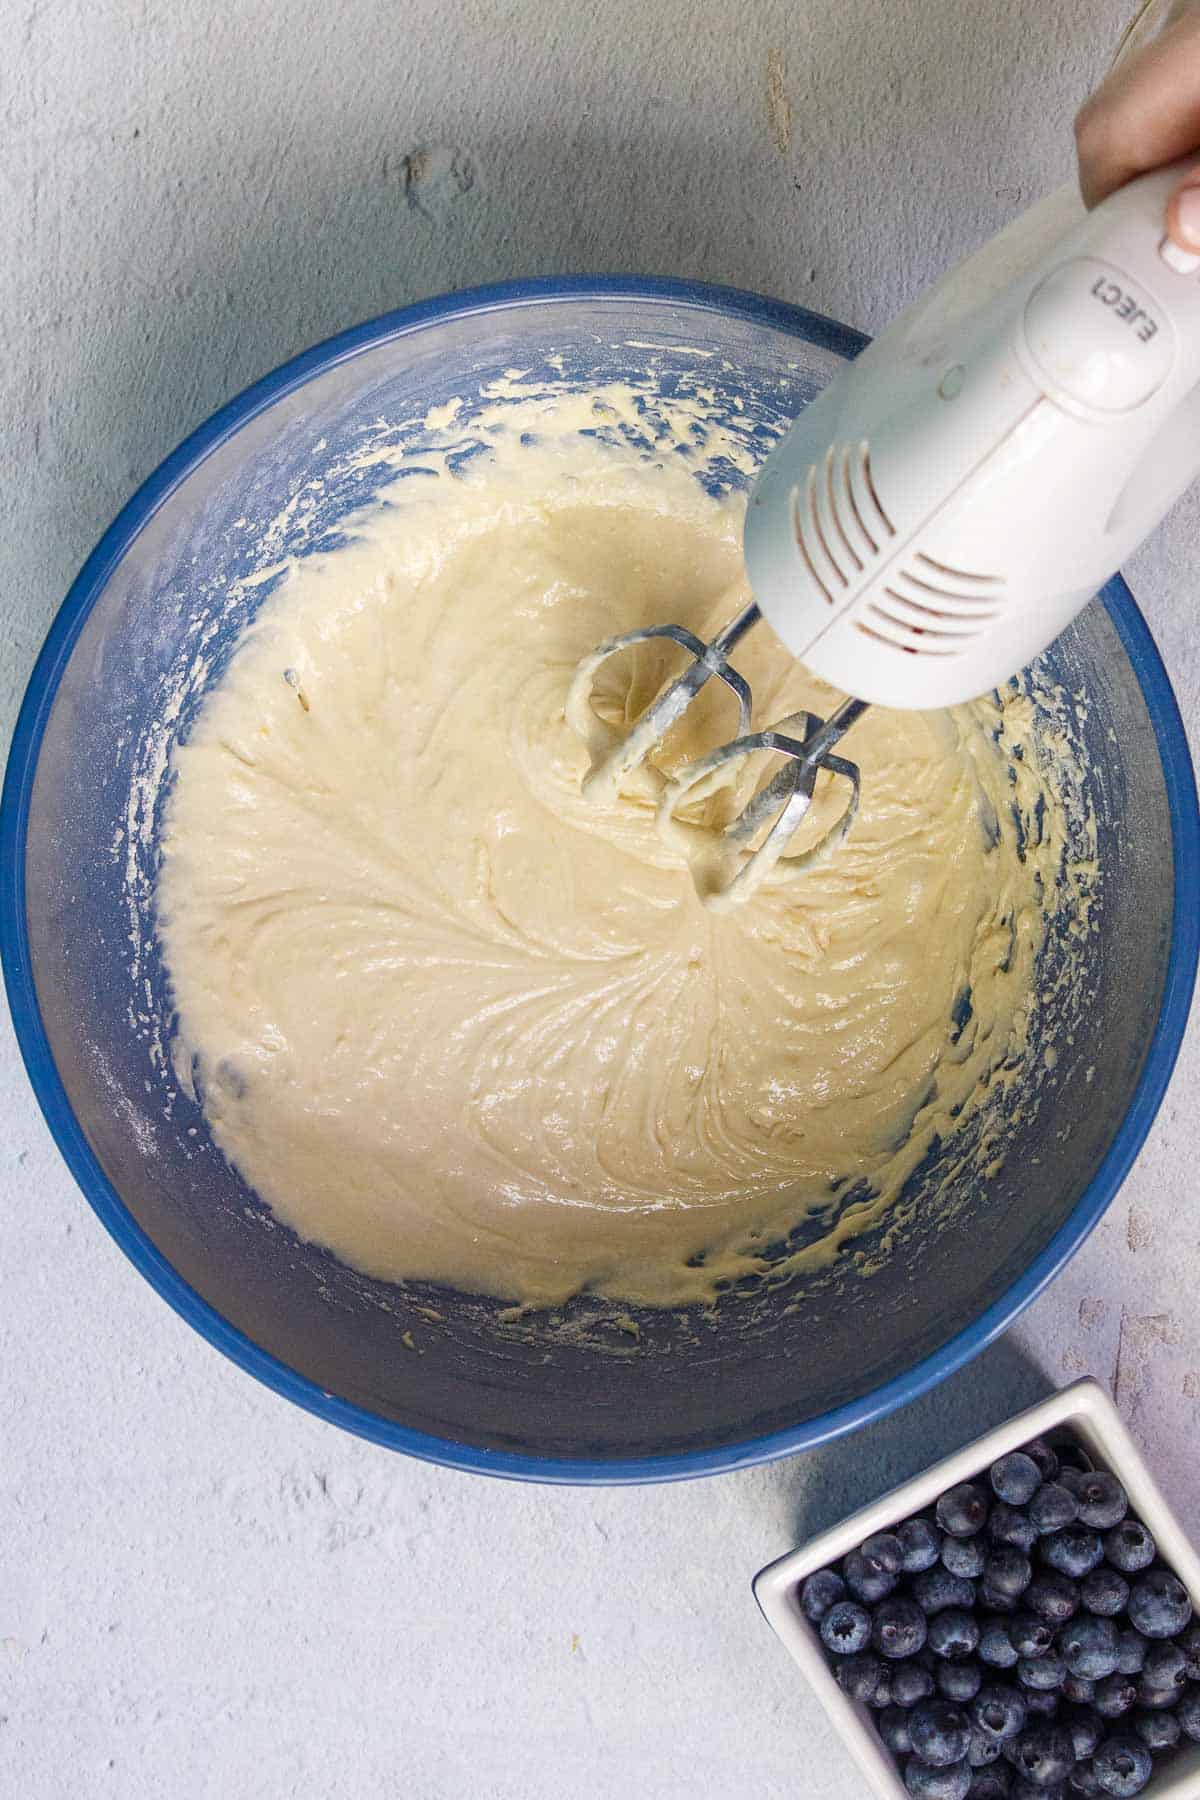 Beating cake mix blueberry muffin batter with a hand mixer in a large mixing bowl